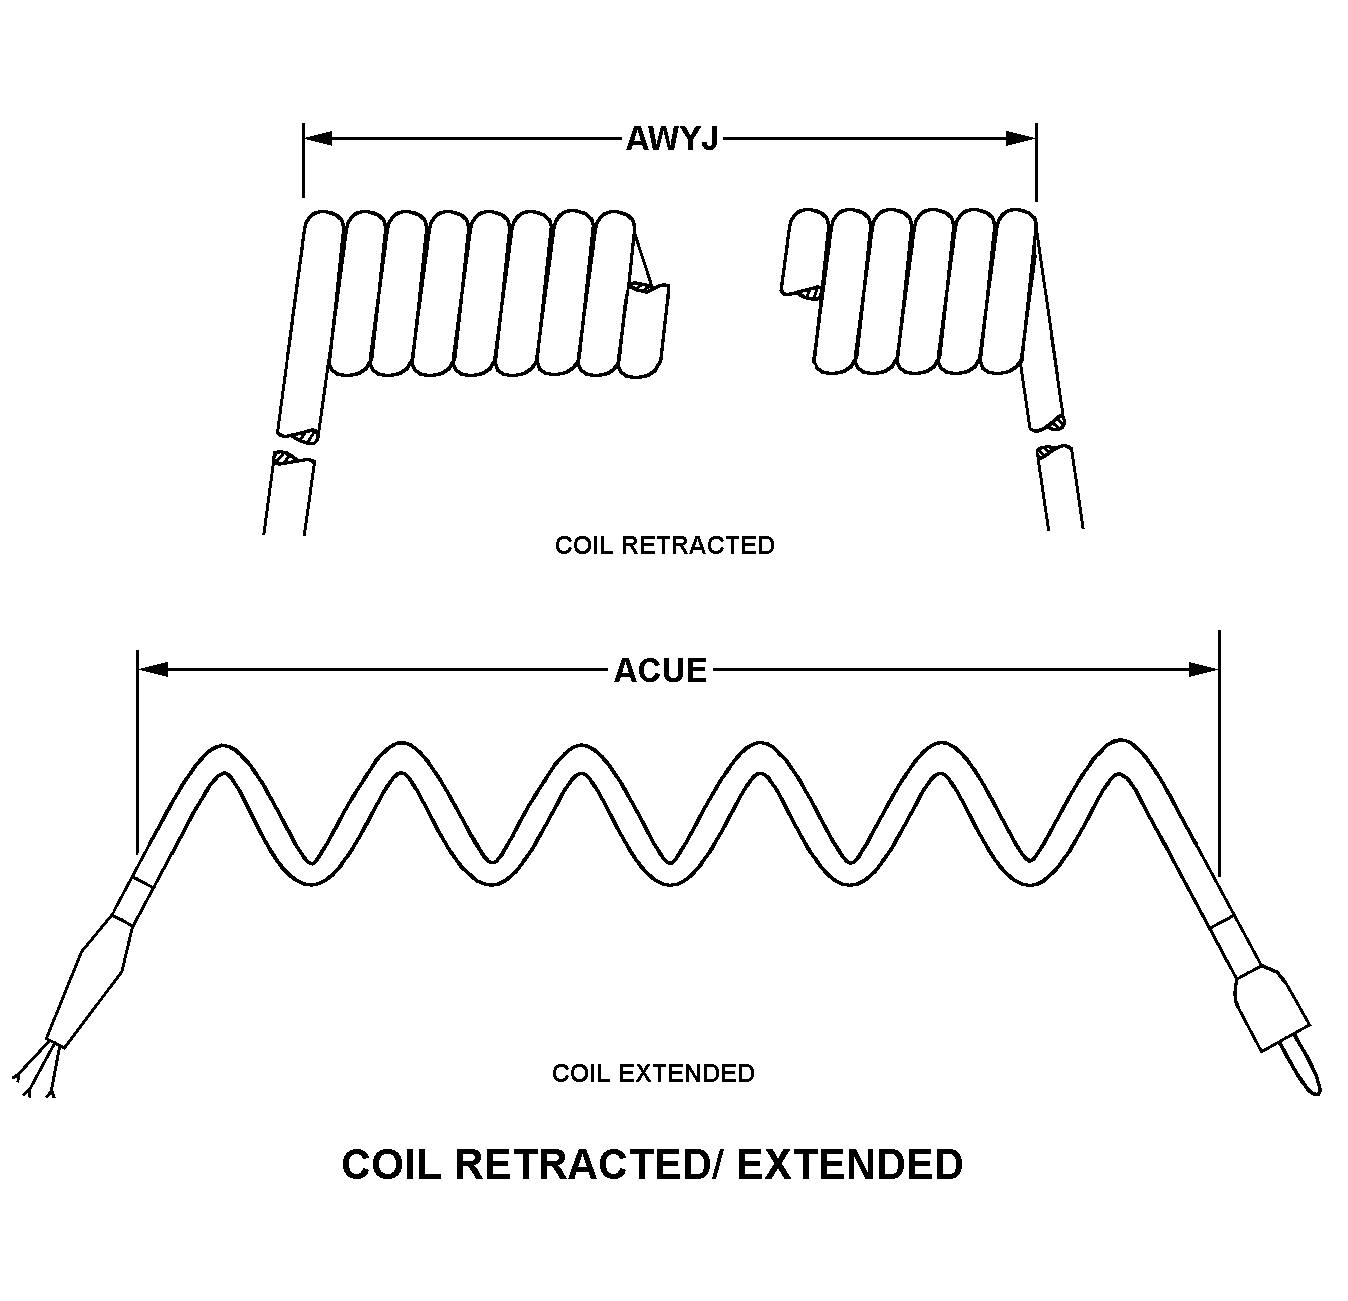 COIL RETRACTED/EXTENDED style nsn 6150-01-511-1929